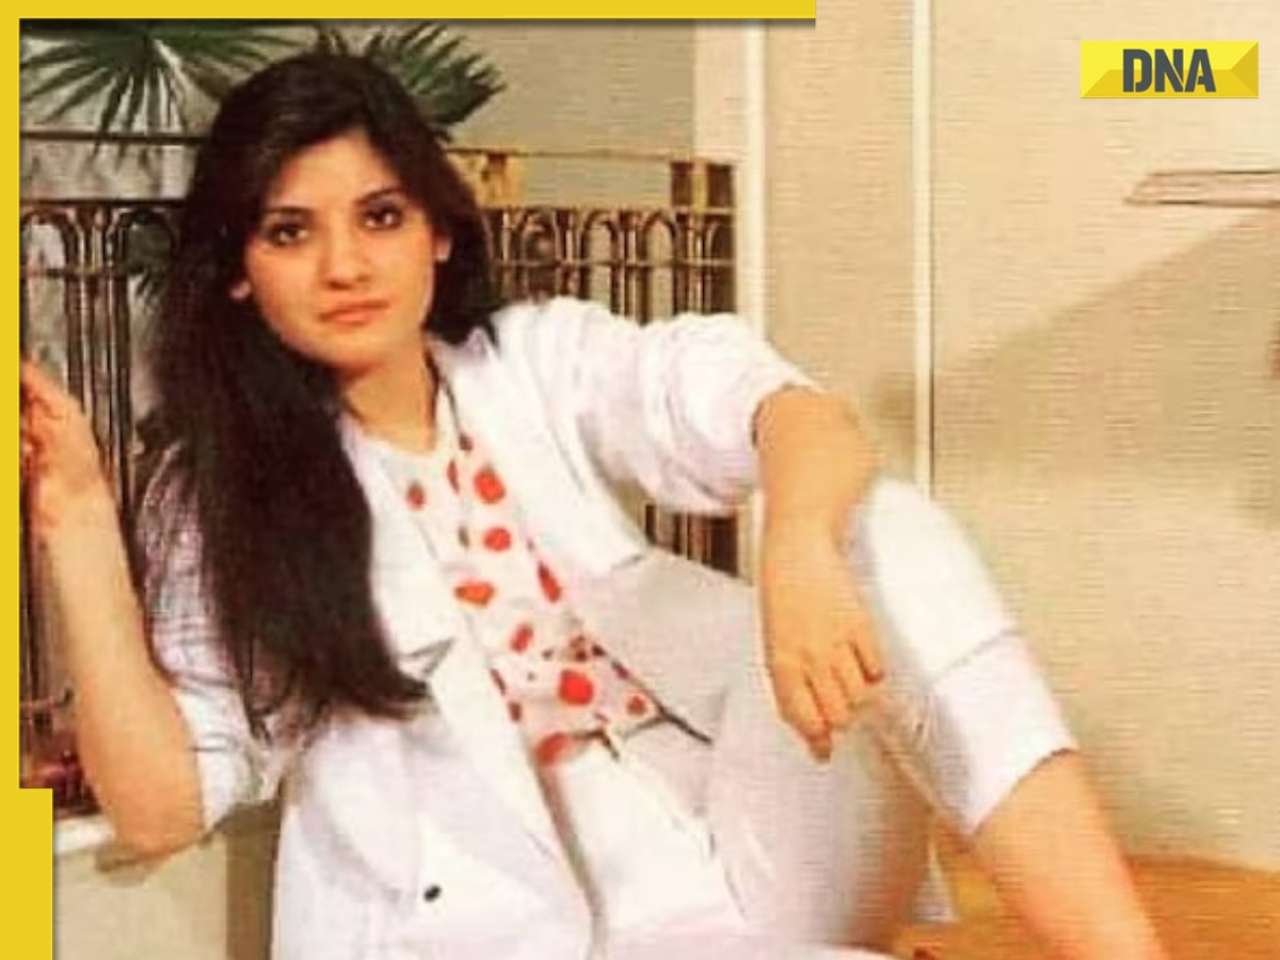 This superstar was discovered by Zeenat Aman, became star at 15, was cheated in love, died tragically at 35 due to..